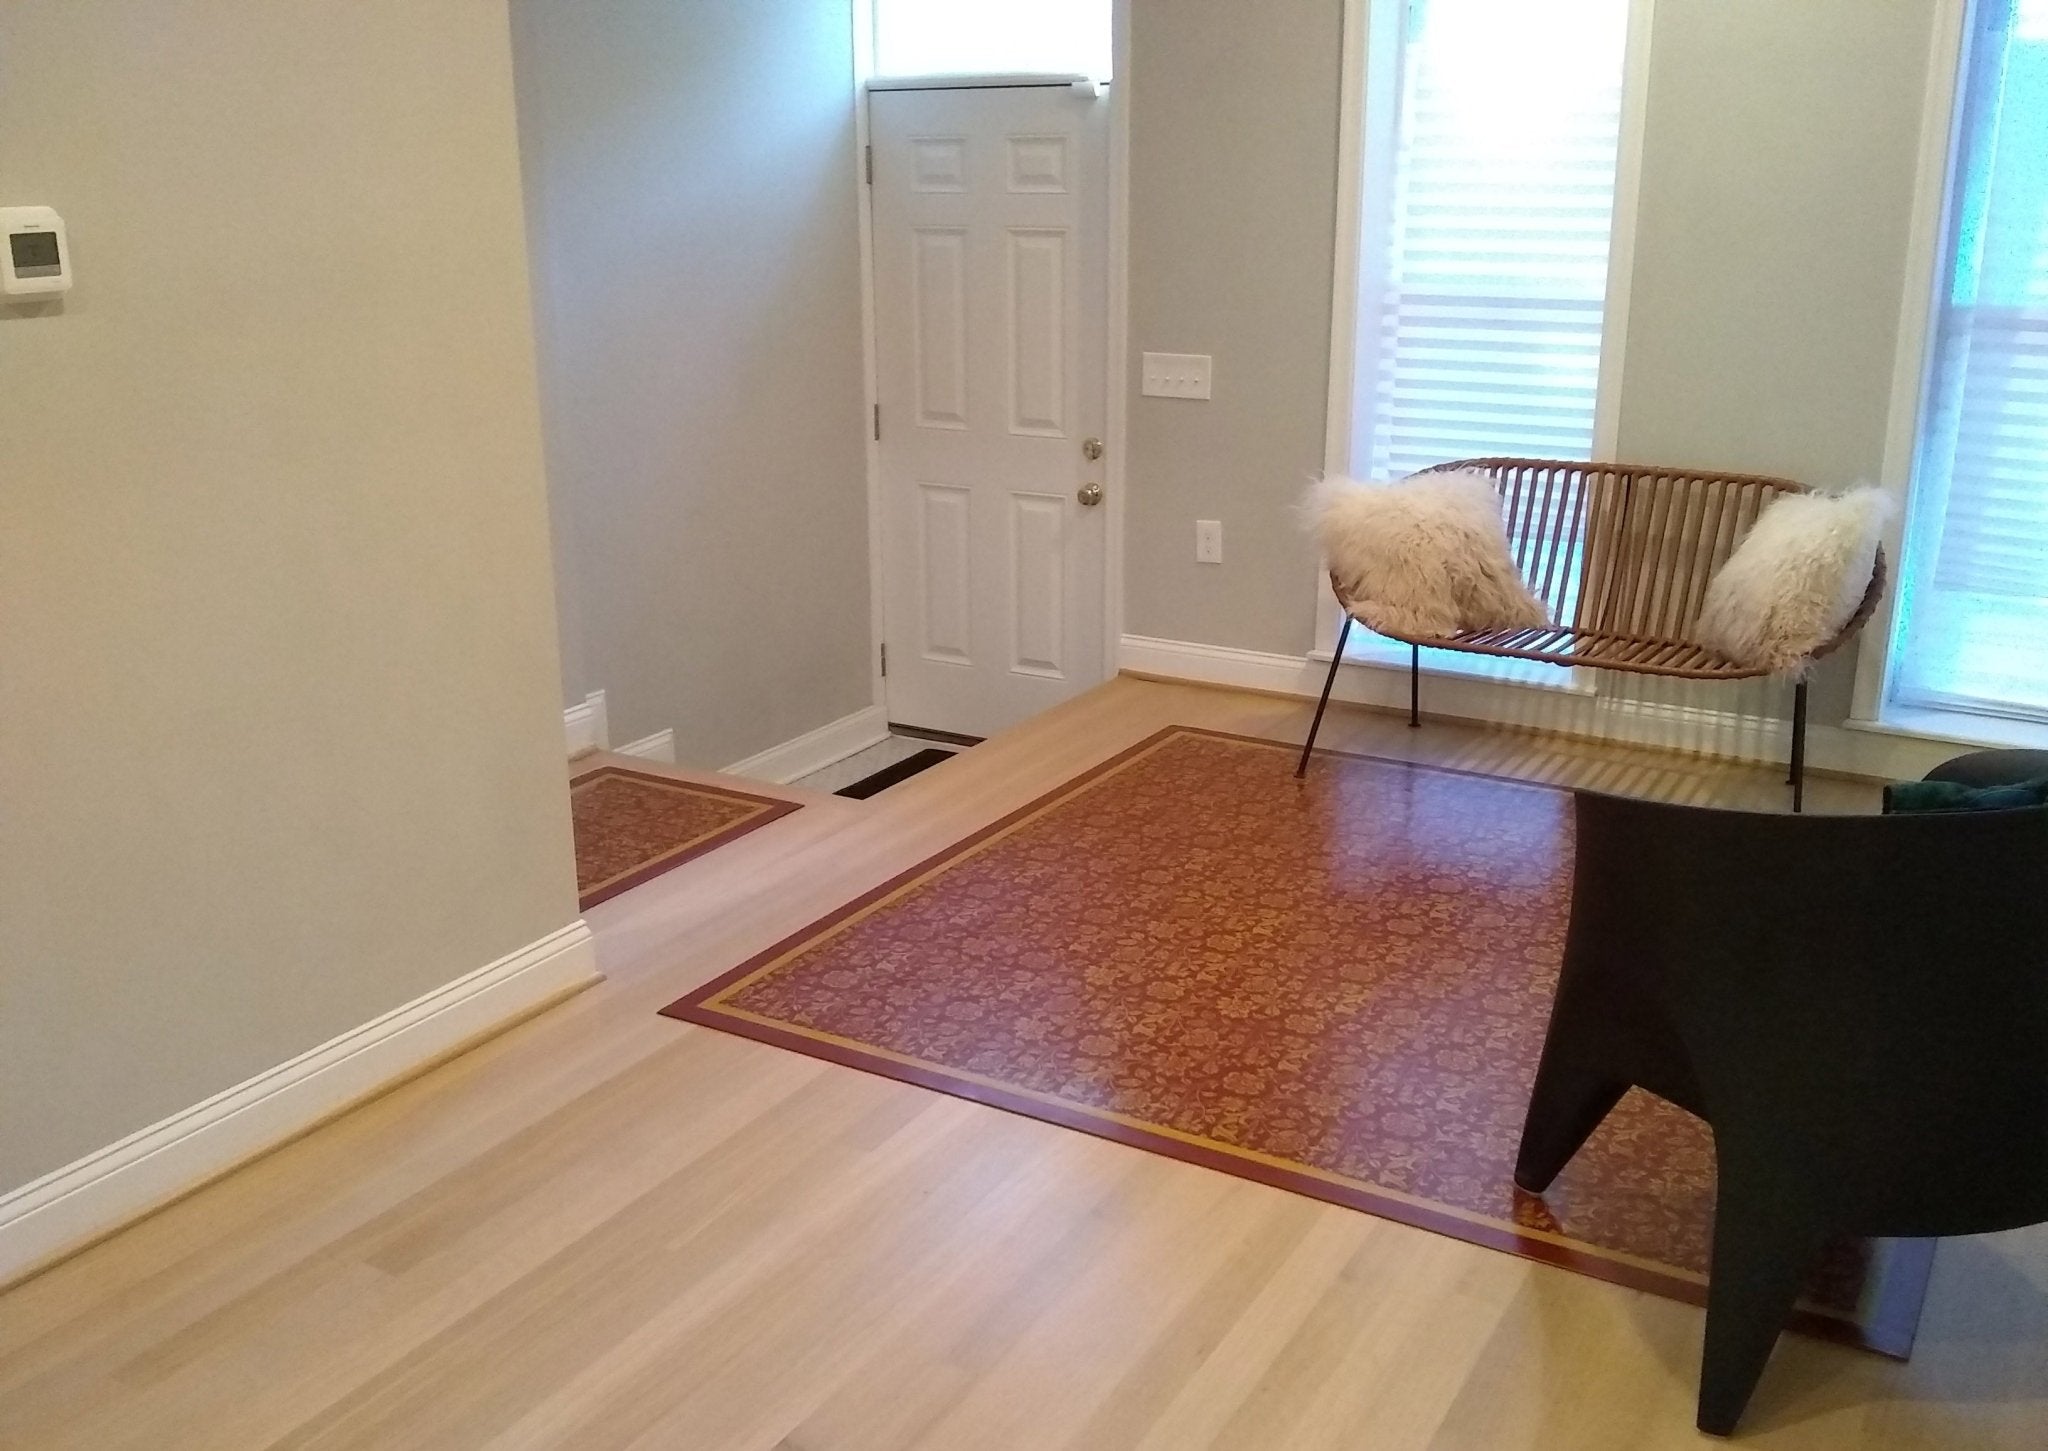 In-situ image of this floorcloth in it's new home and looks great with the modern decor.